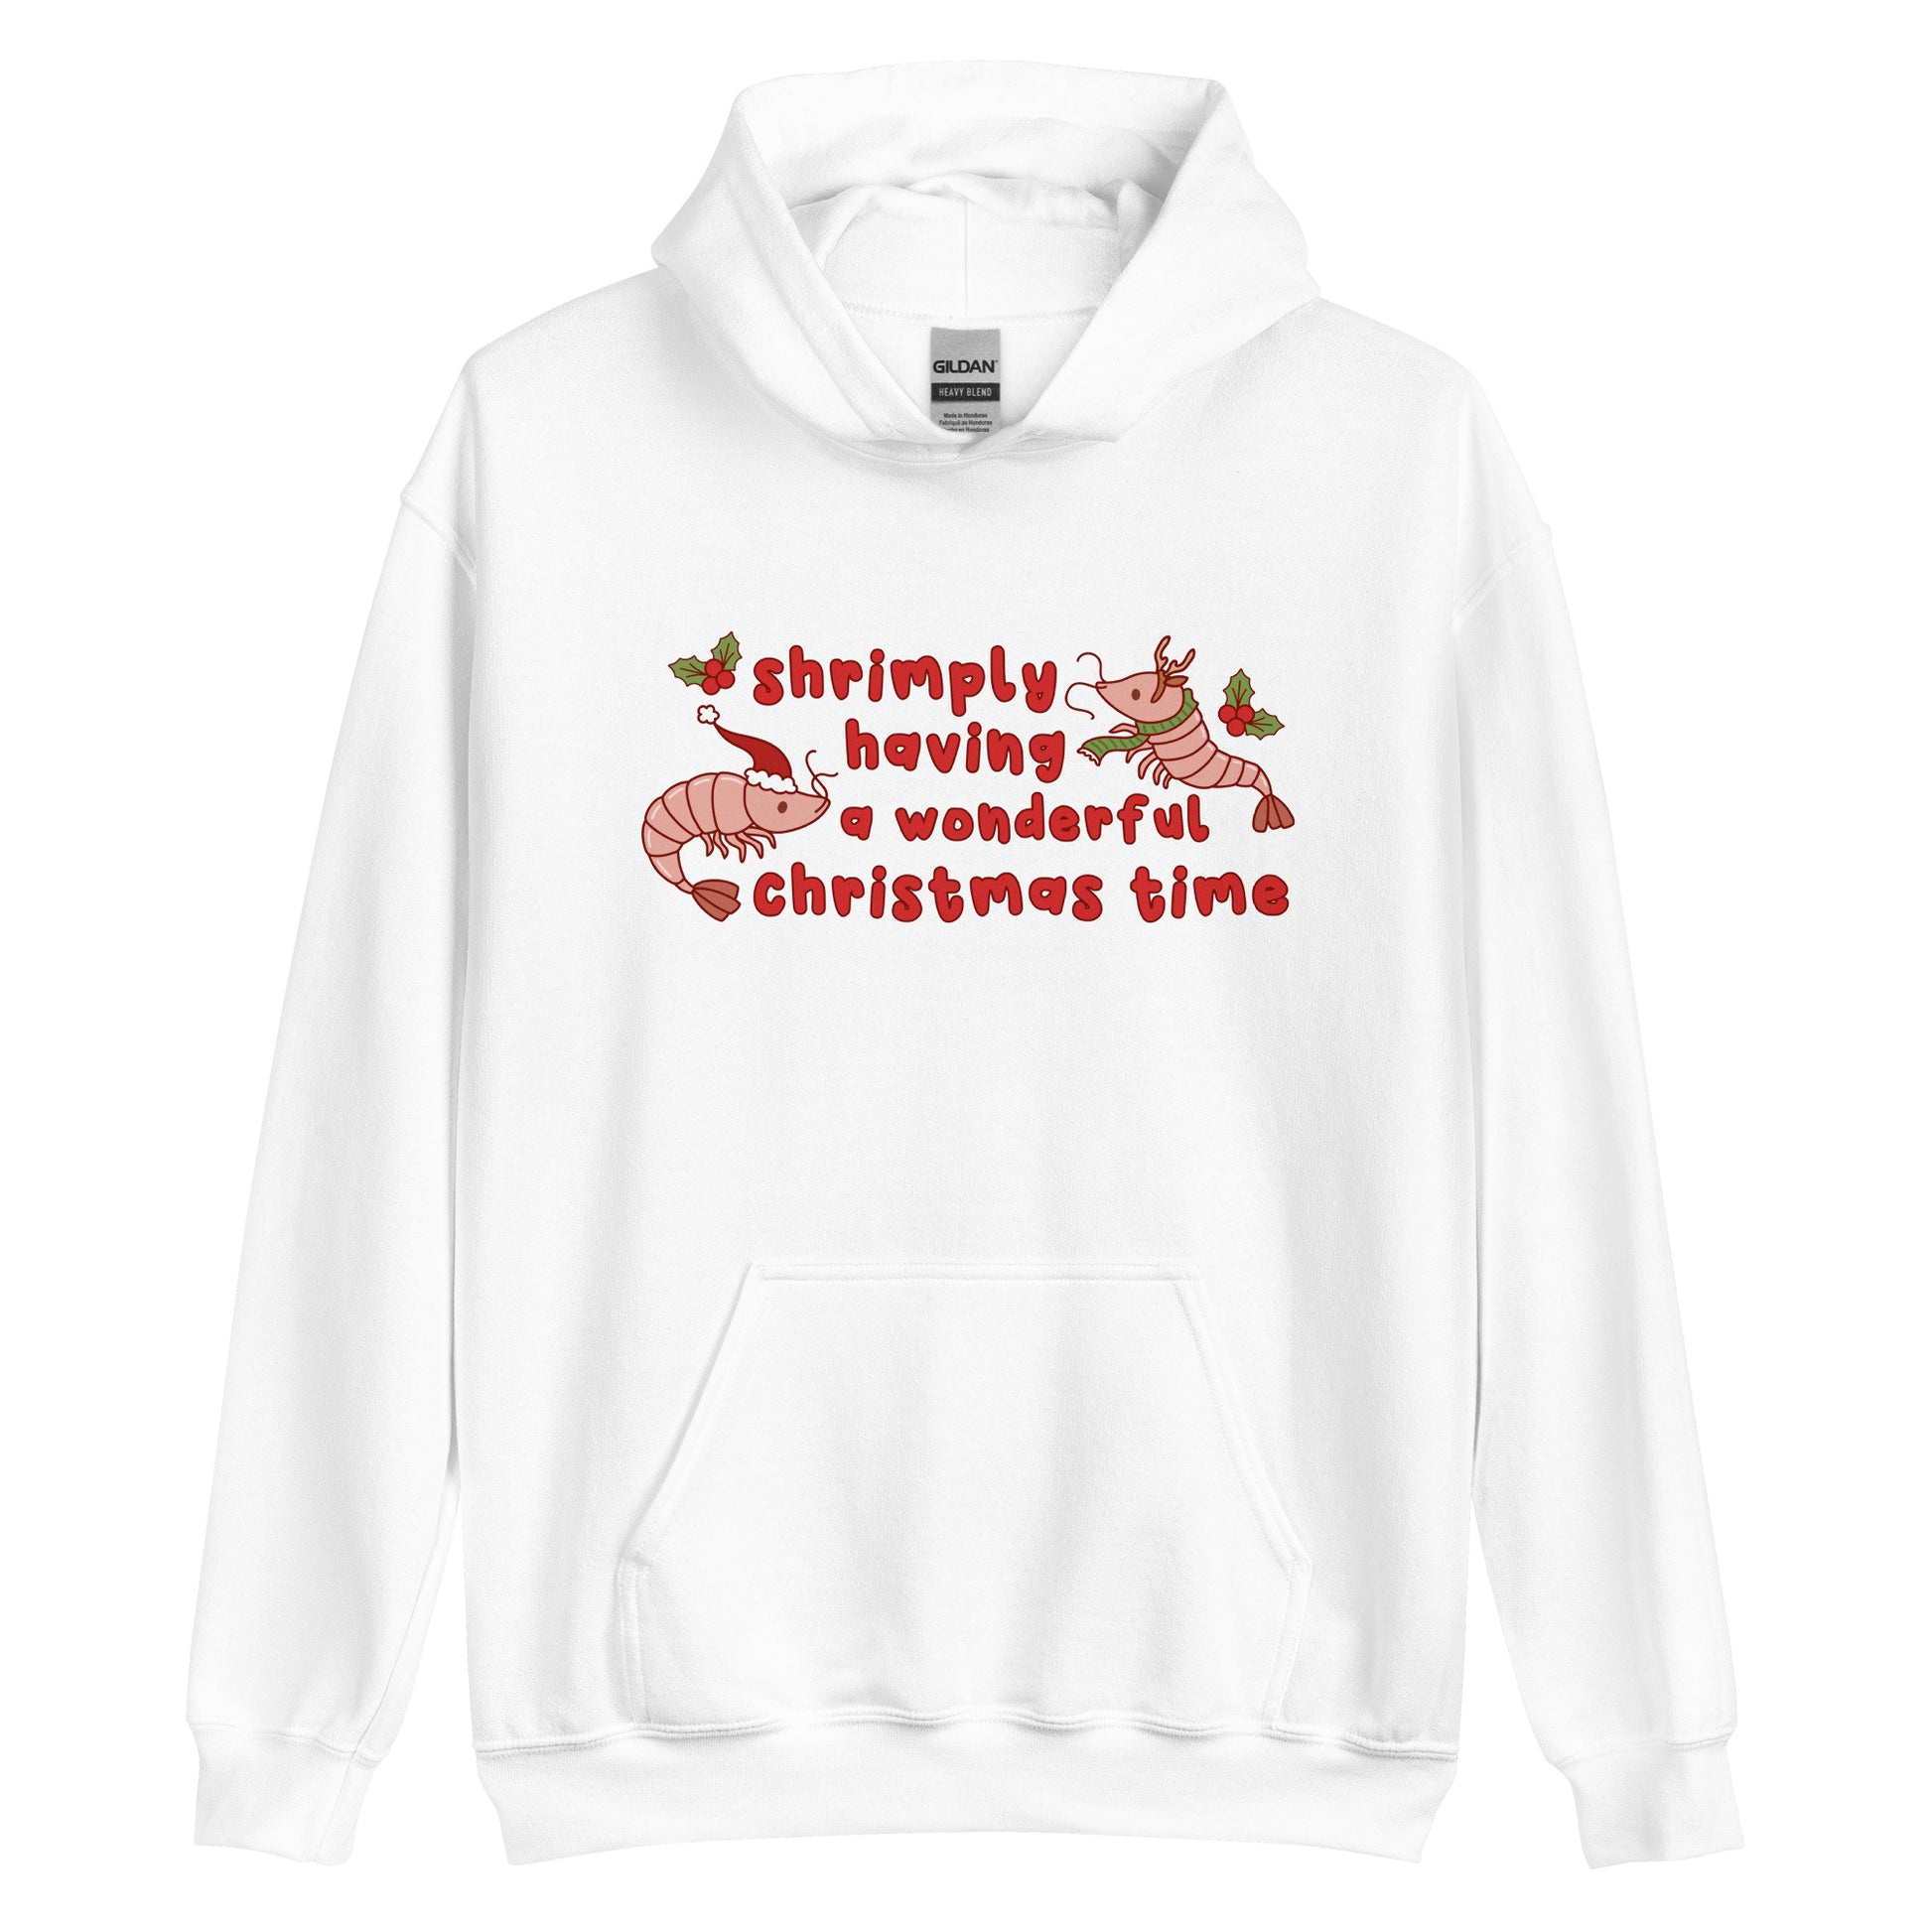 A white hooded sweatshirt featuring an illustration of two festive shrimp - one with a Santa hat, and one with reindeer antlers. Text between the shrimp reads "shrimply having a wonderful Christmas time".